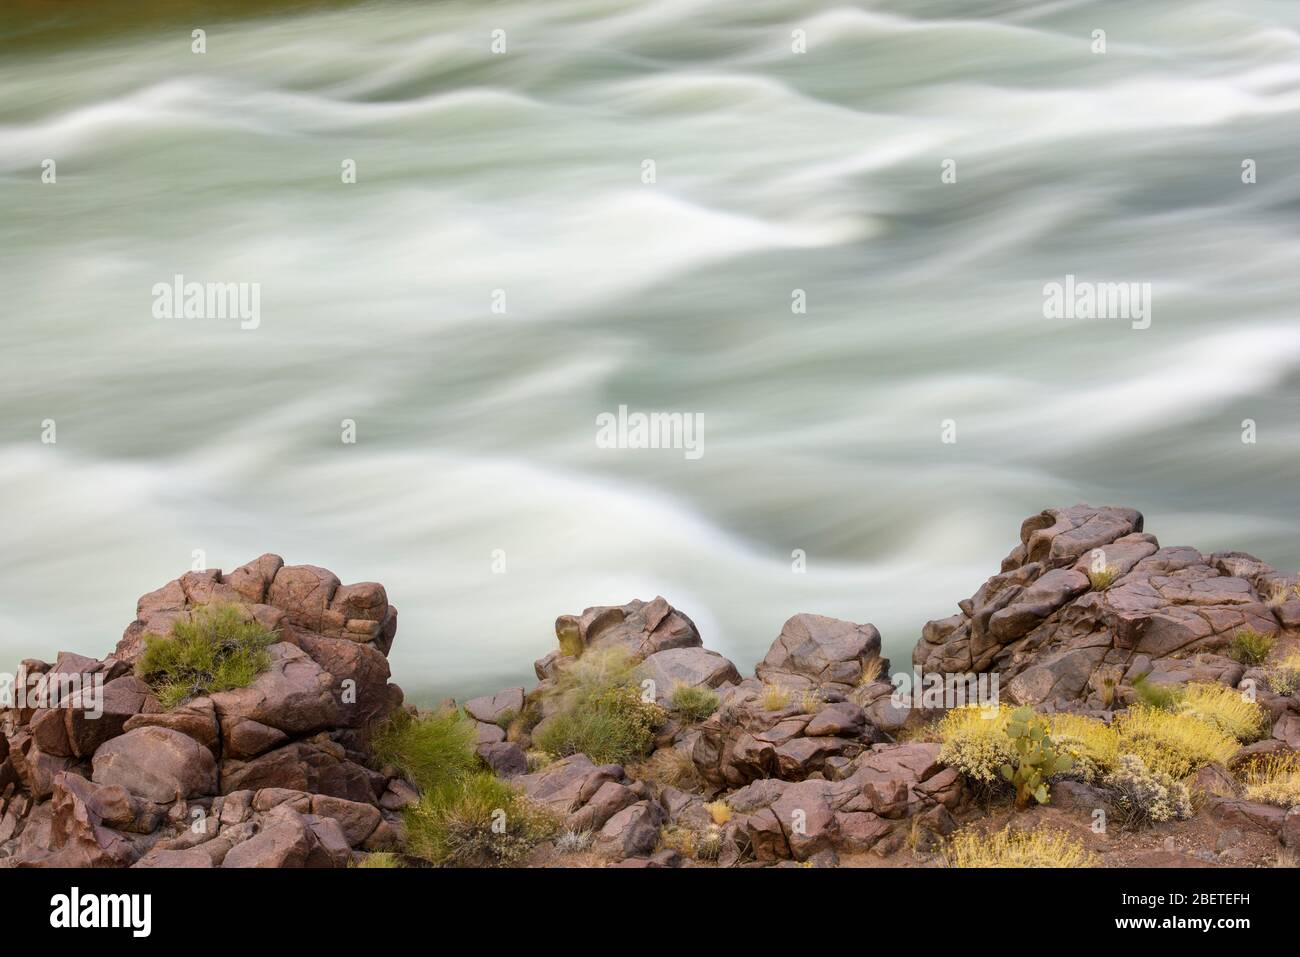 The Colorado River. Bass Rapid from the Bass trail, Grand Canyon National Park, Arizona, USA Stock Photo